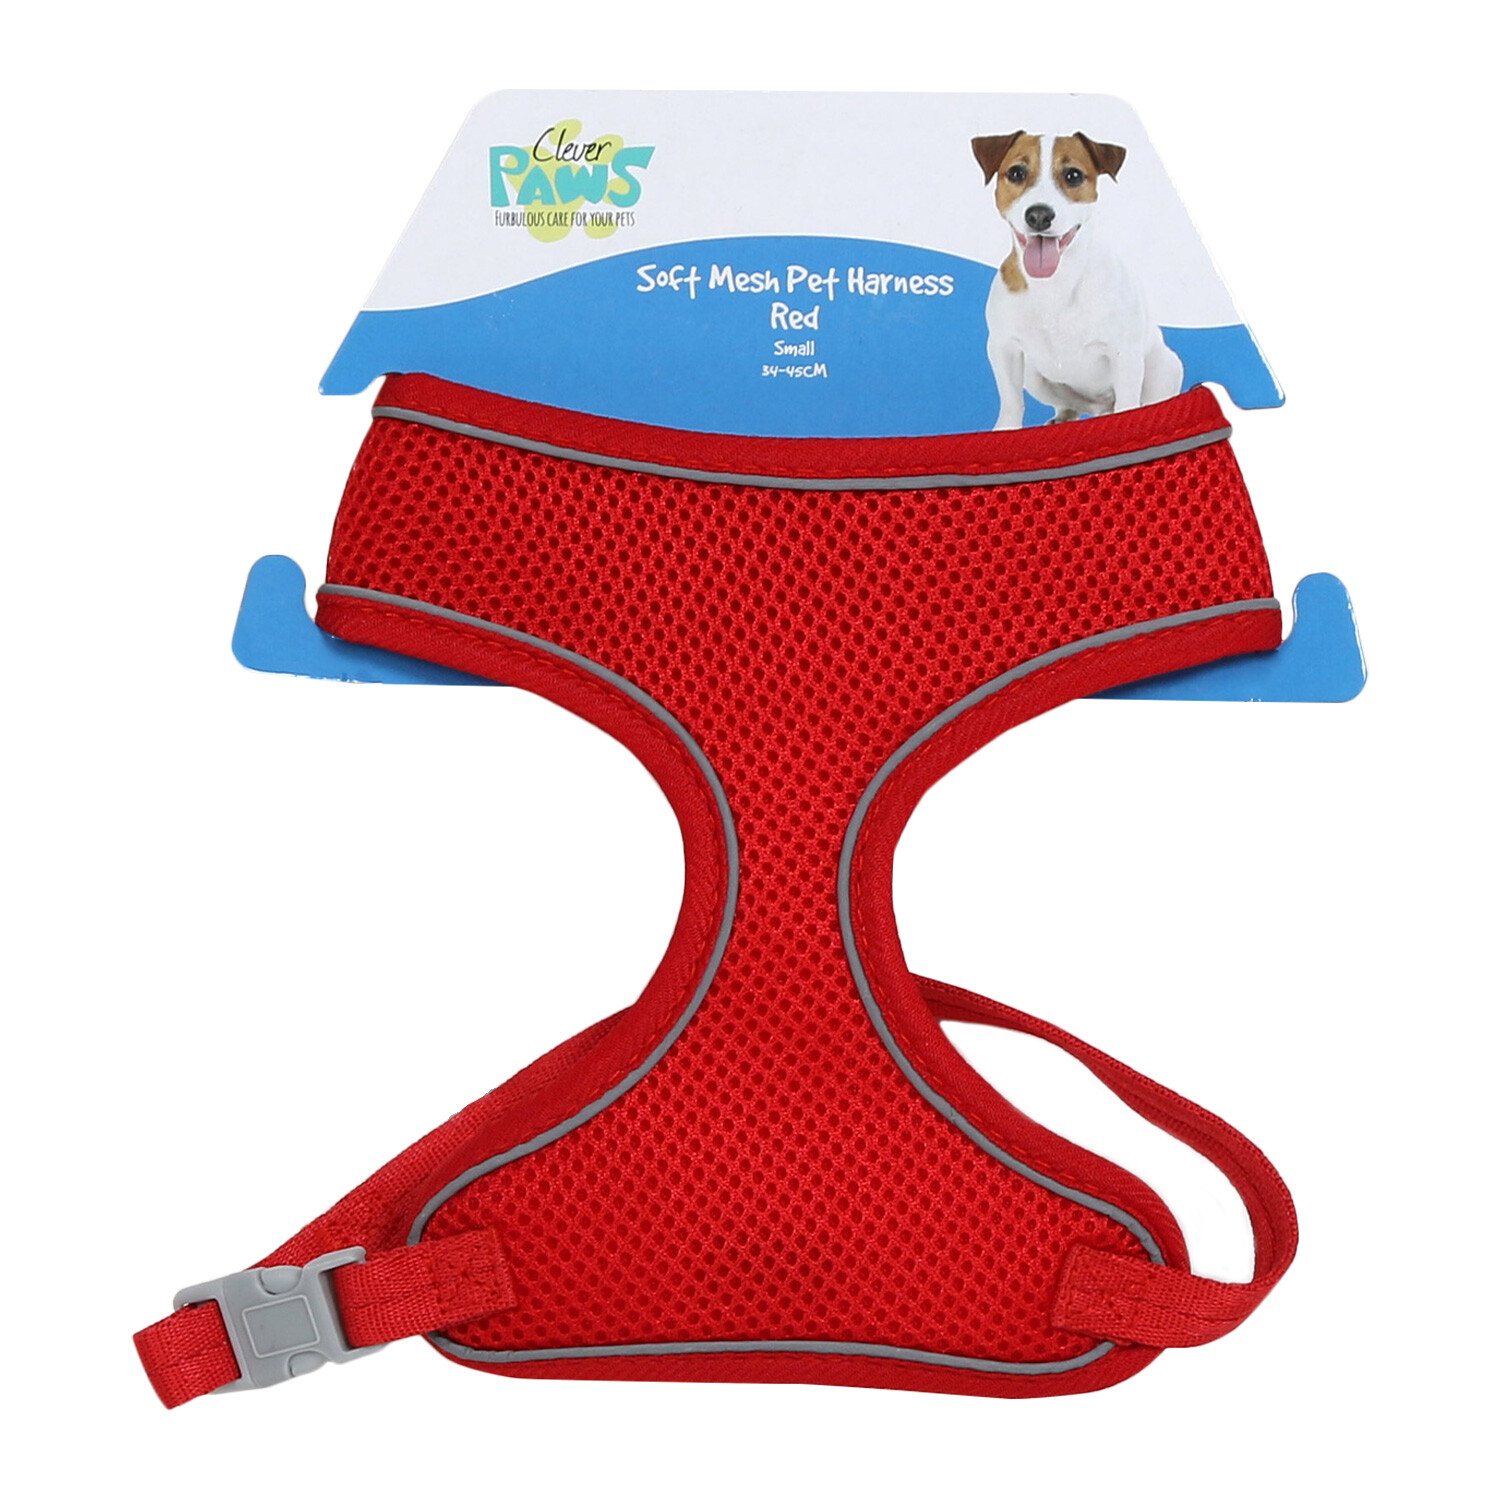 Soft Mesh Pet Harness - Red / Small Image